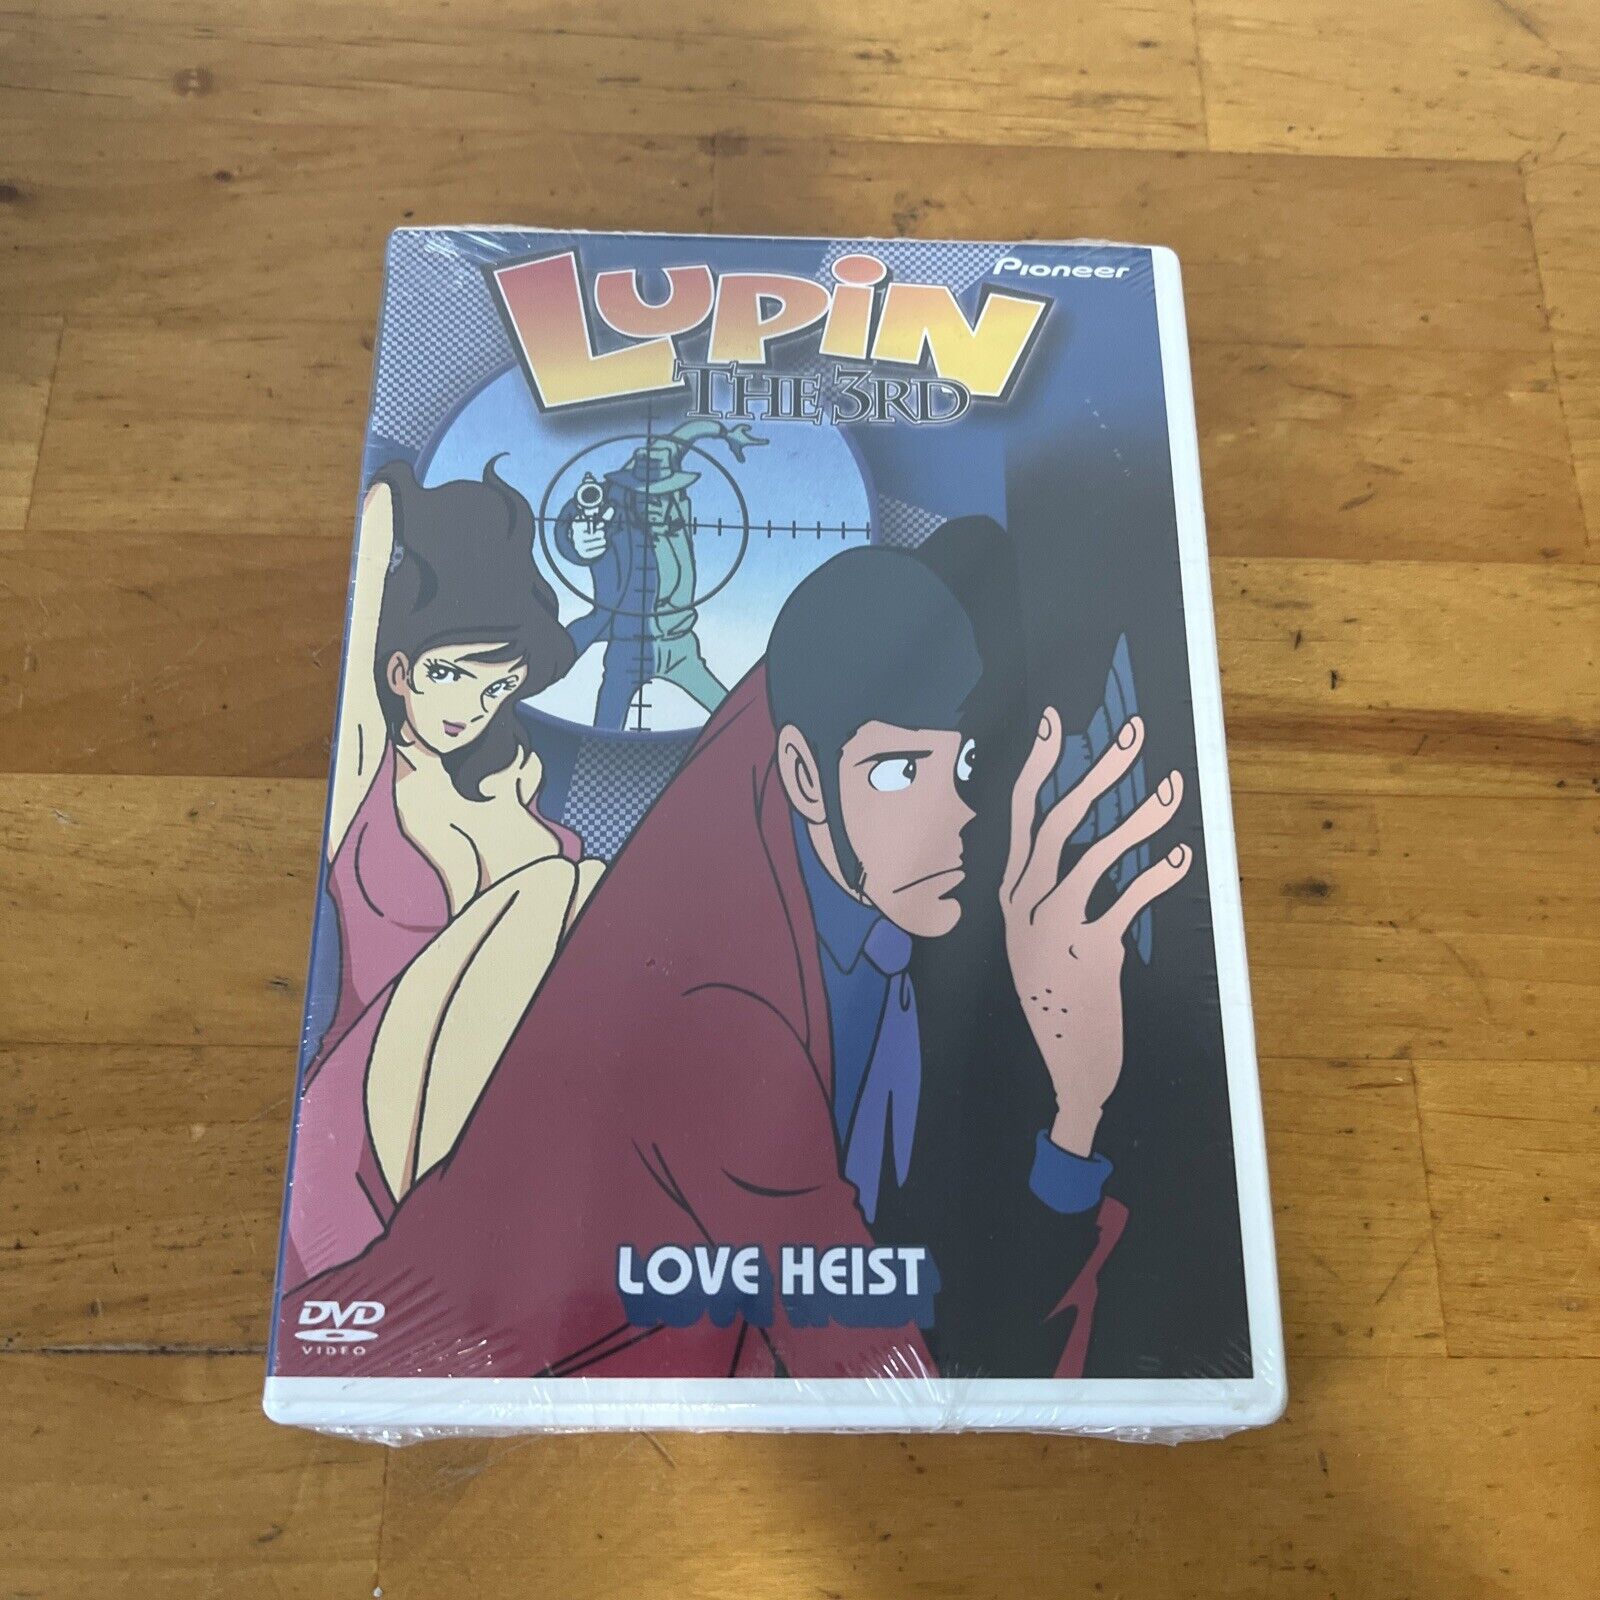 Lupin the 3rd - Vol. 2: Love Heist (DVD, 2003) for sale online | eBay